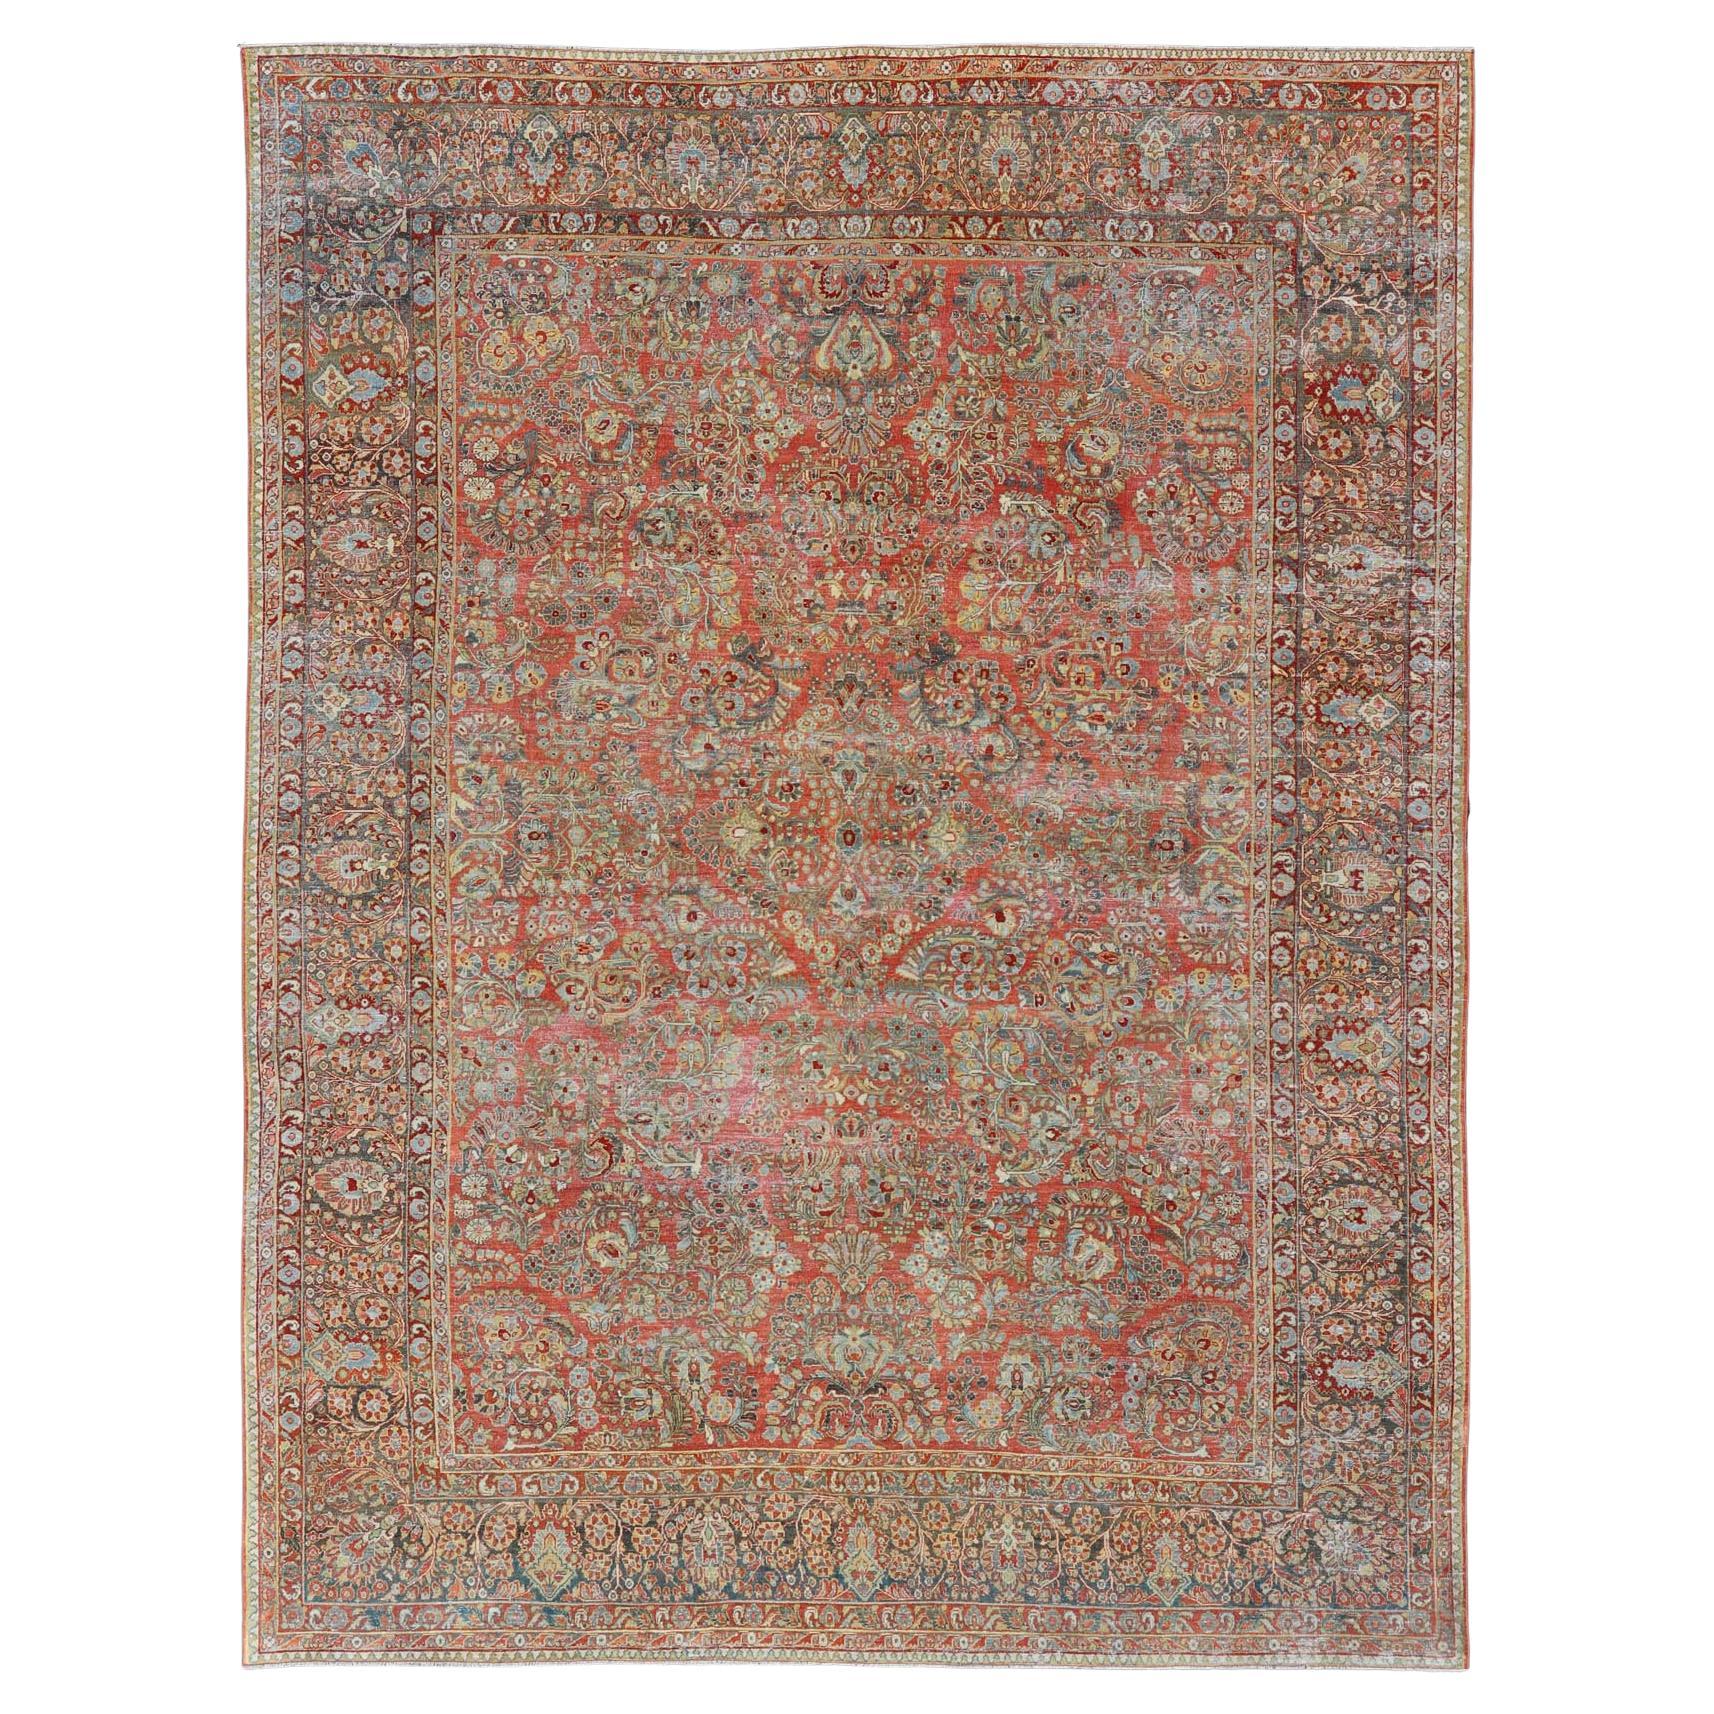 Antique Persian Sarouk with All-Over Floral Design on a Light Red Field